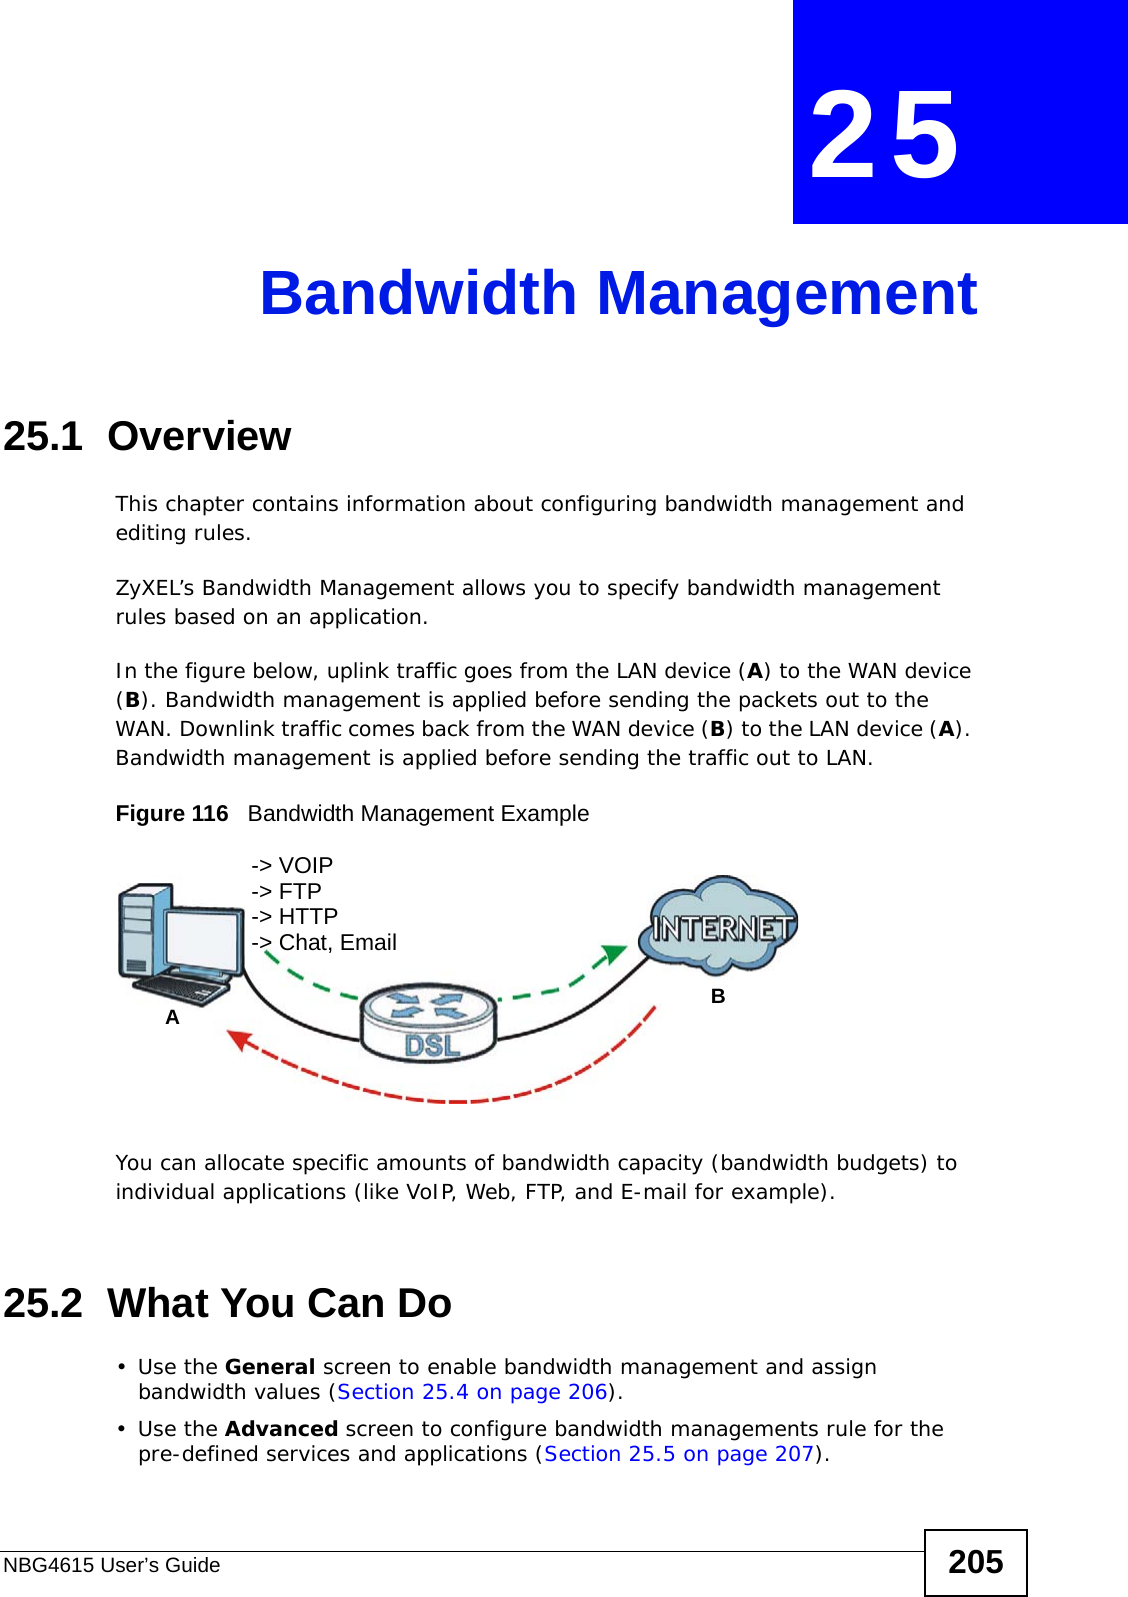 NBG4615 User’s Guide 205CHAPTER  25 Bandwidth Management25.1  Overview This chapter contains information about configuring bandwidth management and editing rules.ZyXEL’s Bandwidth Management allows you to specify bandwidth management rules based on an application. In the figure below, uplink traffic goes from the LAN device (A) to the WAN device (B). Bandwidth management is applied before sending the packets out to the WAN. Downlink traffic comes back from the WAN device (B) to the LAN device (A). Bandwidth management is applied before sending the traffic out to LAN.Figure 116   Bandwidth Management ExampleYou can allocate specific amounts of bandwidth capacity (bandwidth budgets) to individual applications (like VoIP, Web, FTP, and E-mail for example).25.2  What You Can Do•Use the General screen to enable bandwidth management and assign bandwidth values (Section 25.4 on page 206).•Use the Advanced screen to configure bandwidth managements rule for the pre-defined services and applications (Section 25.5 on page 207).AB-&gt; VOIP-&gt; FTP-&gt; HTTP-&gt; Chat, Email